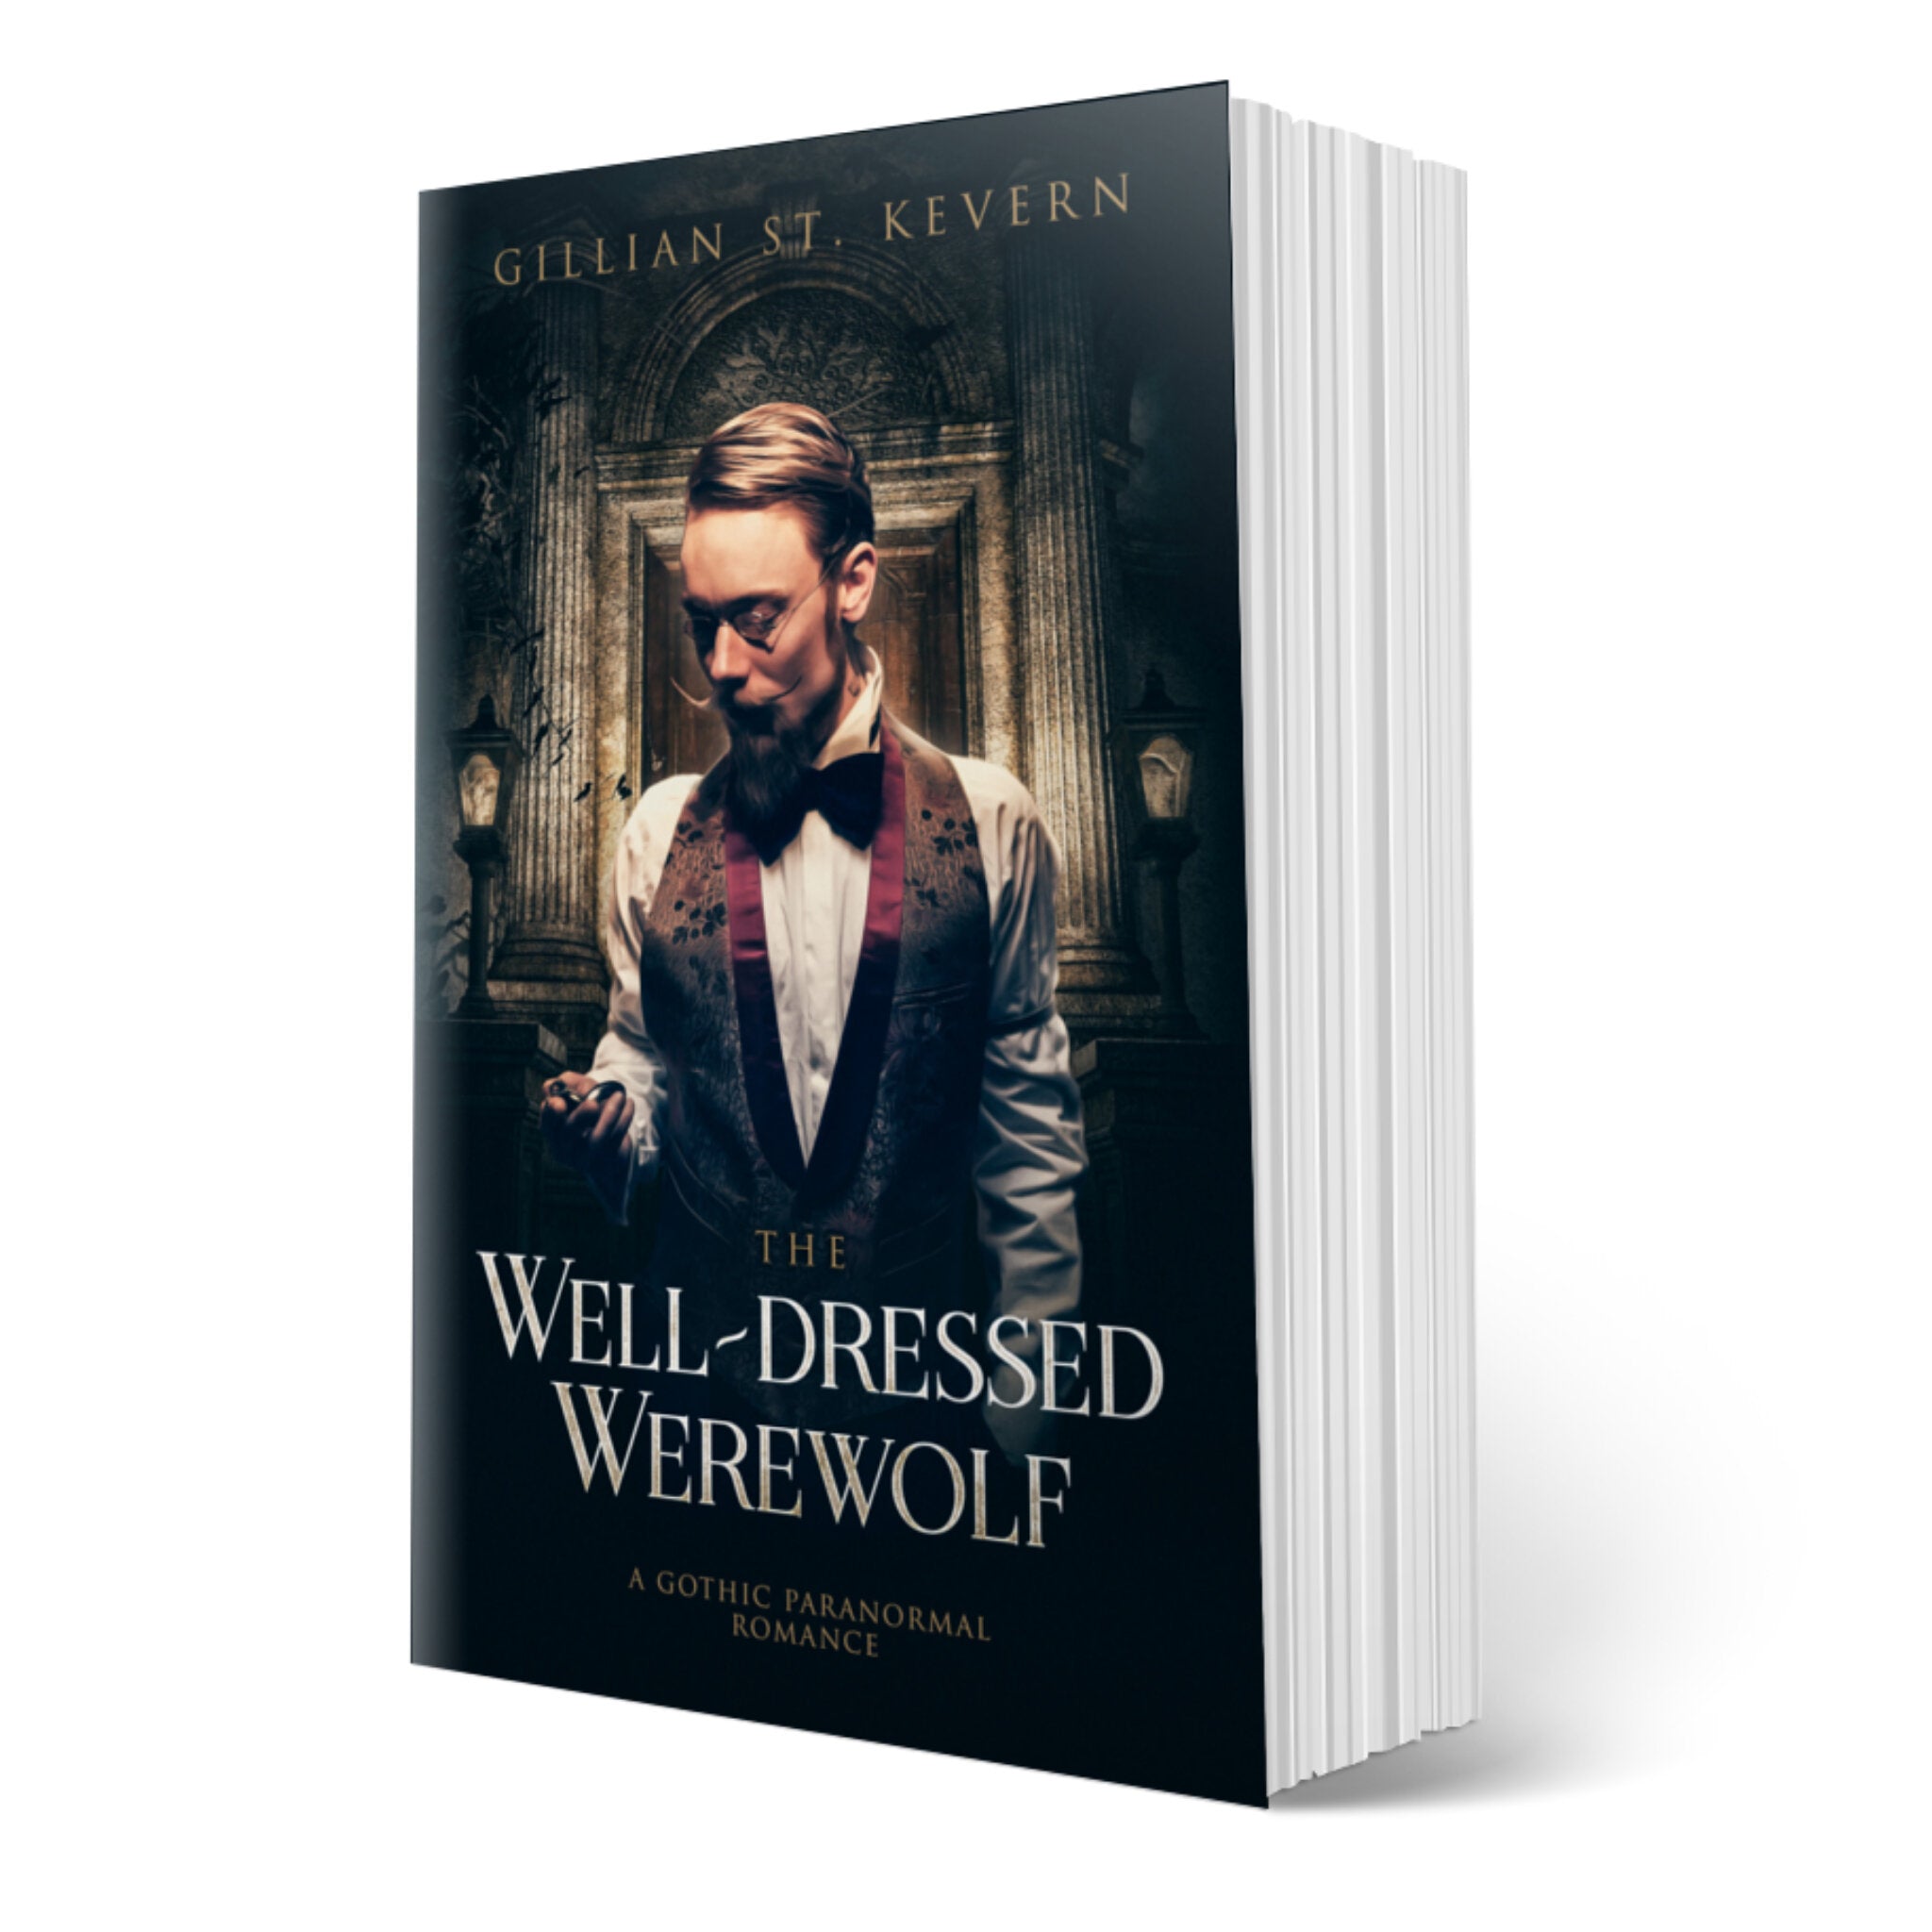 The Well-dressed Werewolf, a gay gothic mystery, cover: Westaway, with his handlebar moustache impeccably groomed and a very sharp vest and bow tie, consults a watch. He stands before a closed door which has a crypt-like aspect.